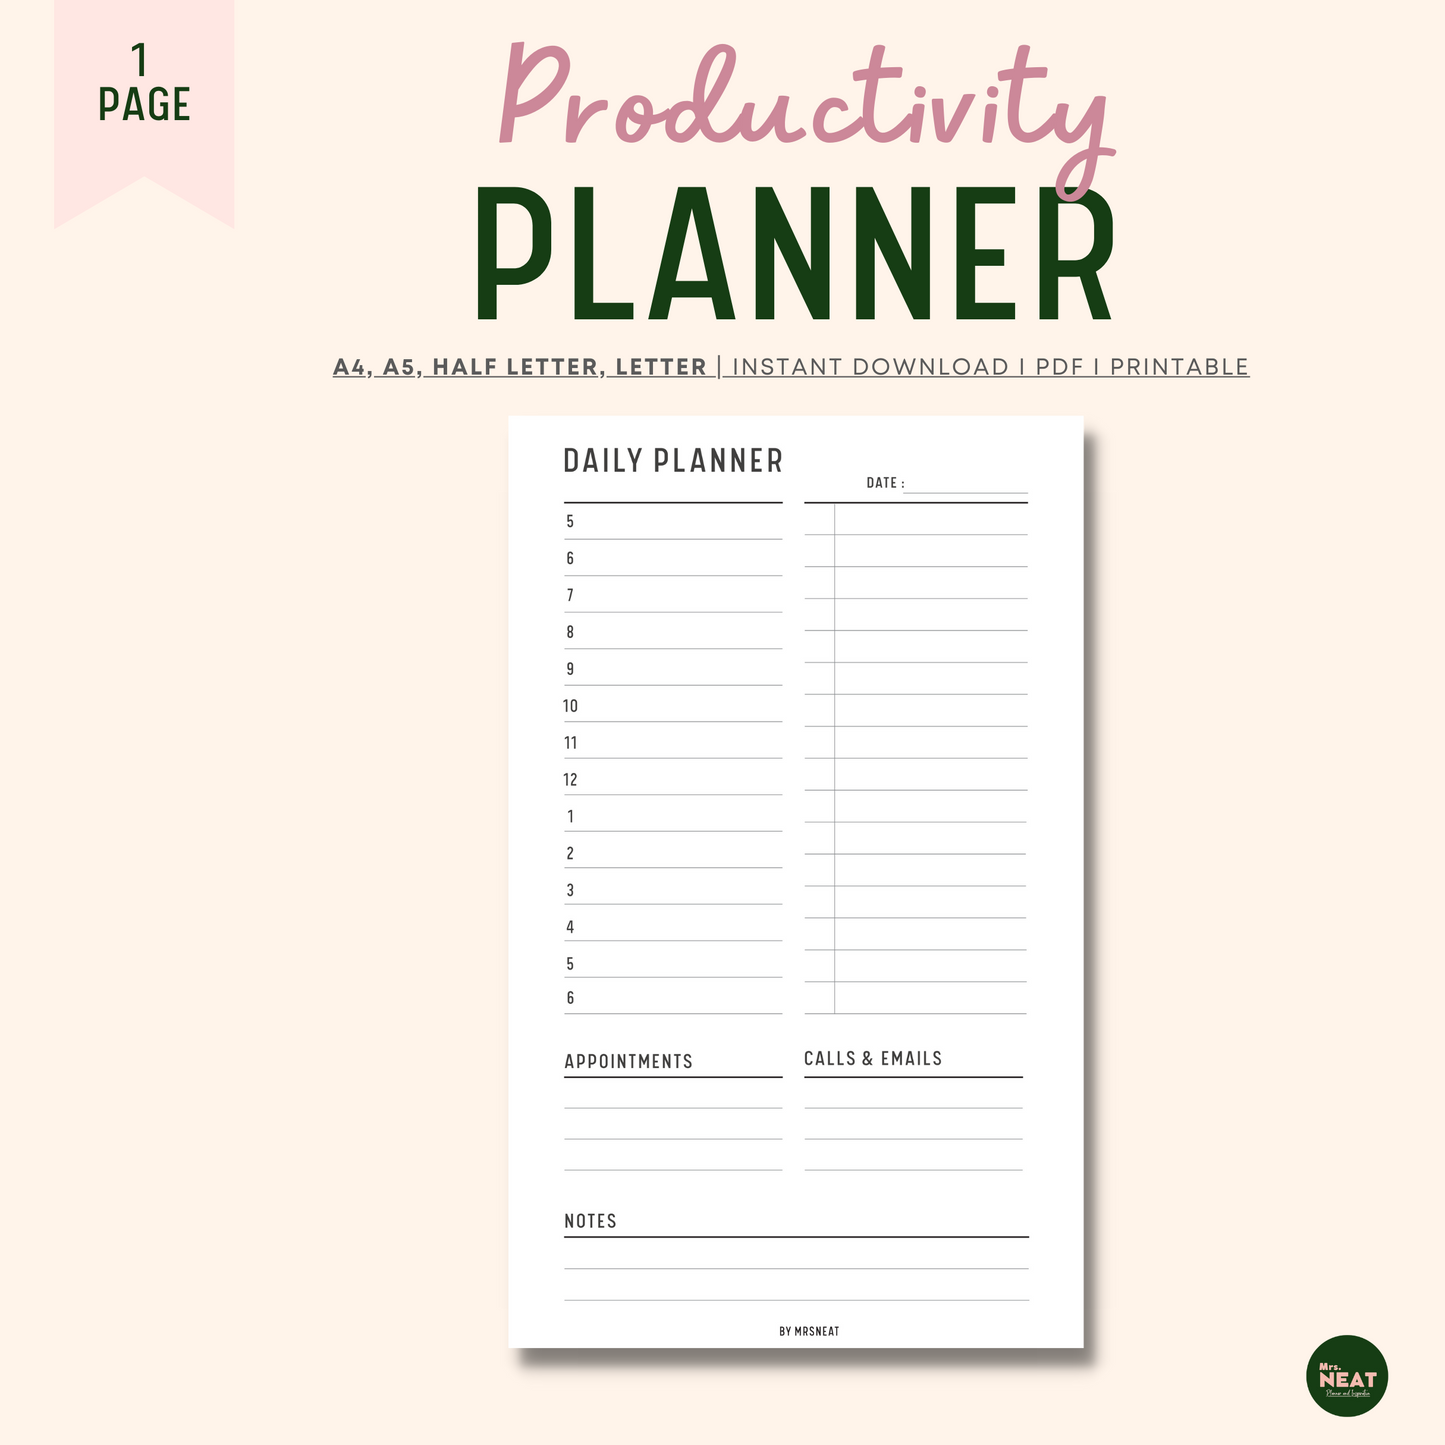 Productivity Daily Planner with room for hourly schedule, appointment, Calls & Emails, notes and undated